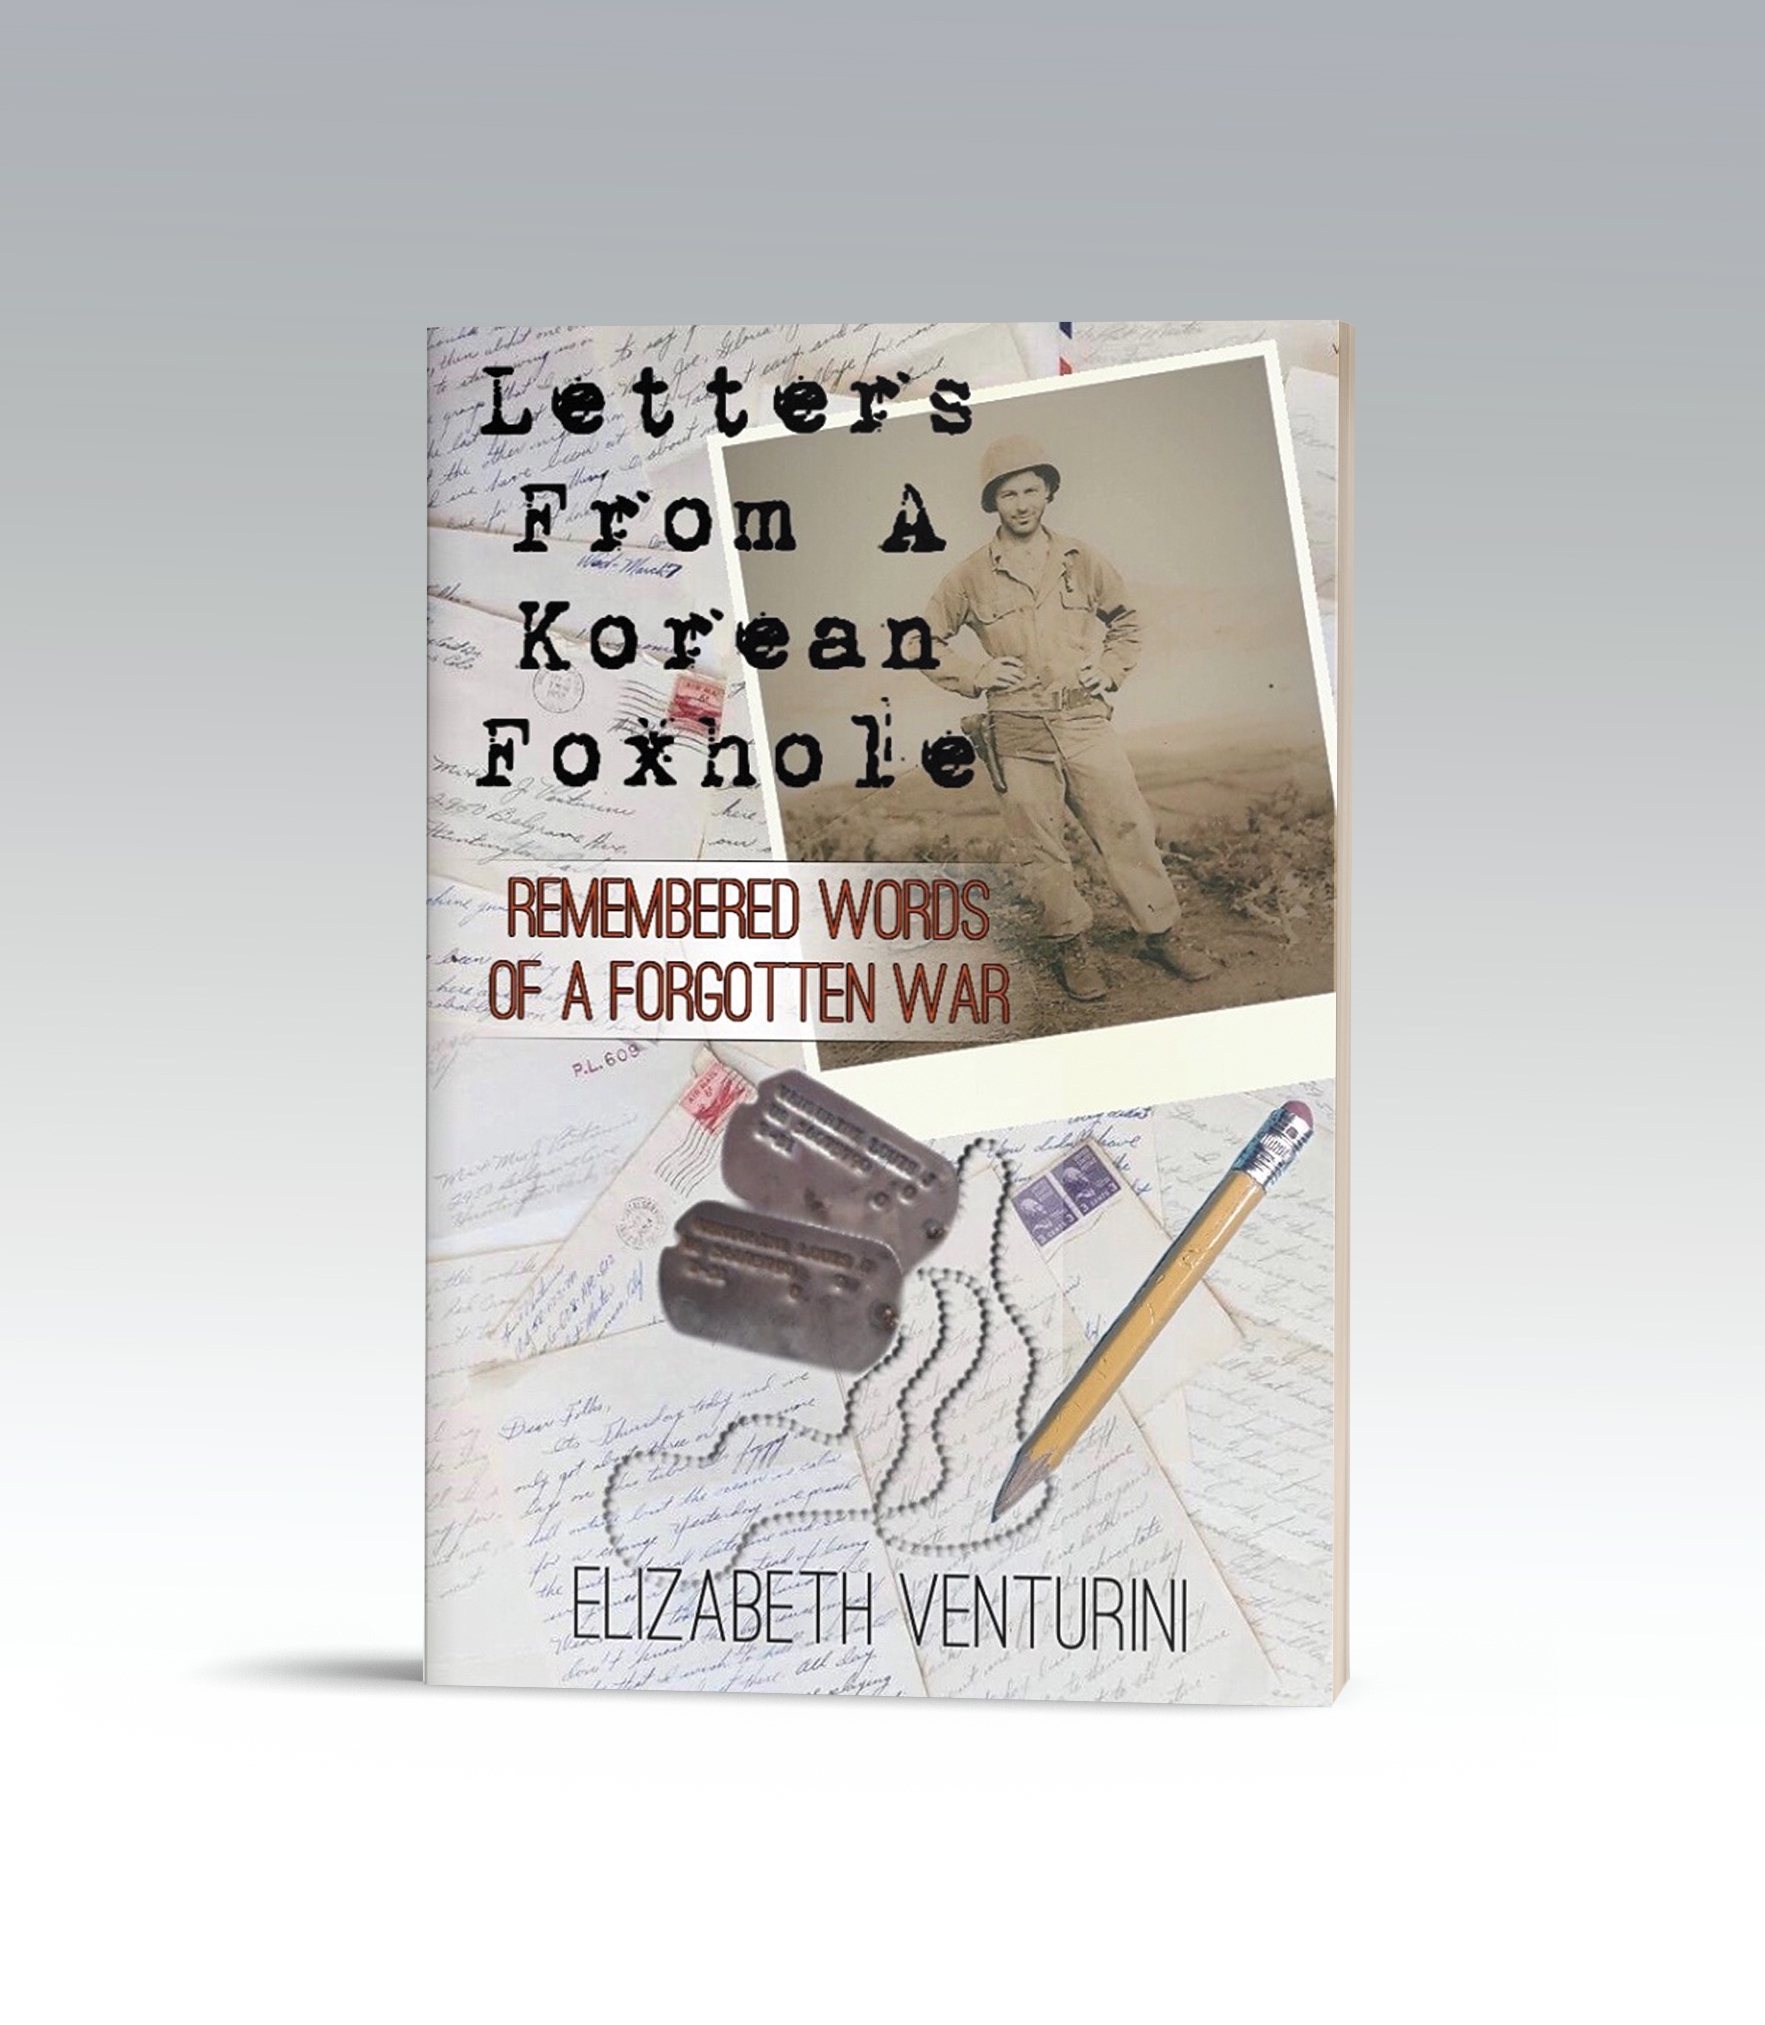 LETTERS FROM A KOREAN FOXHOLE